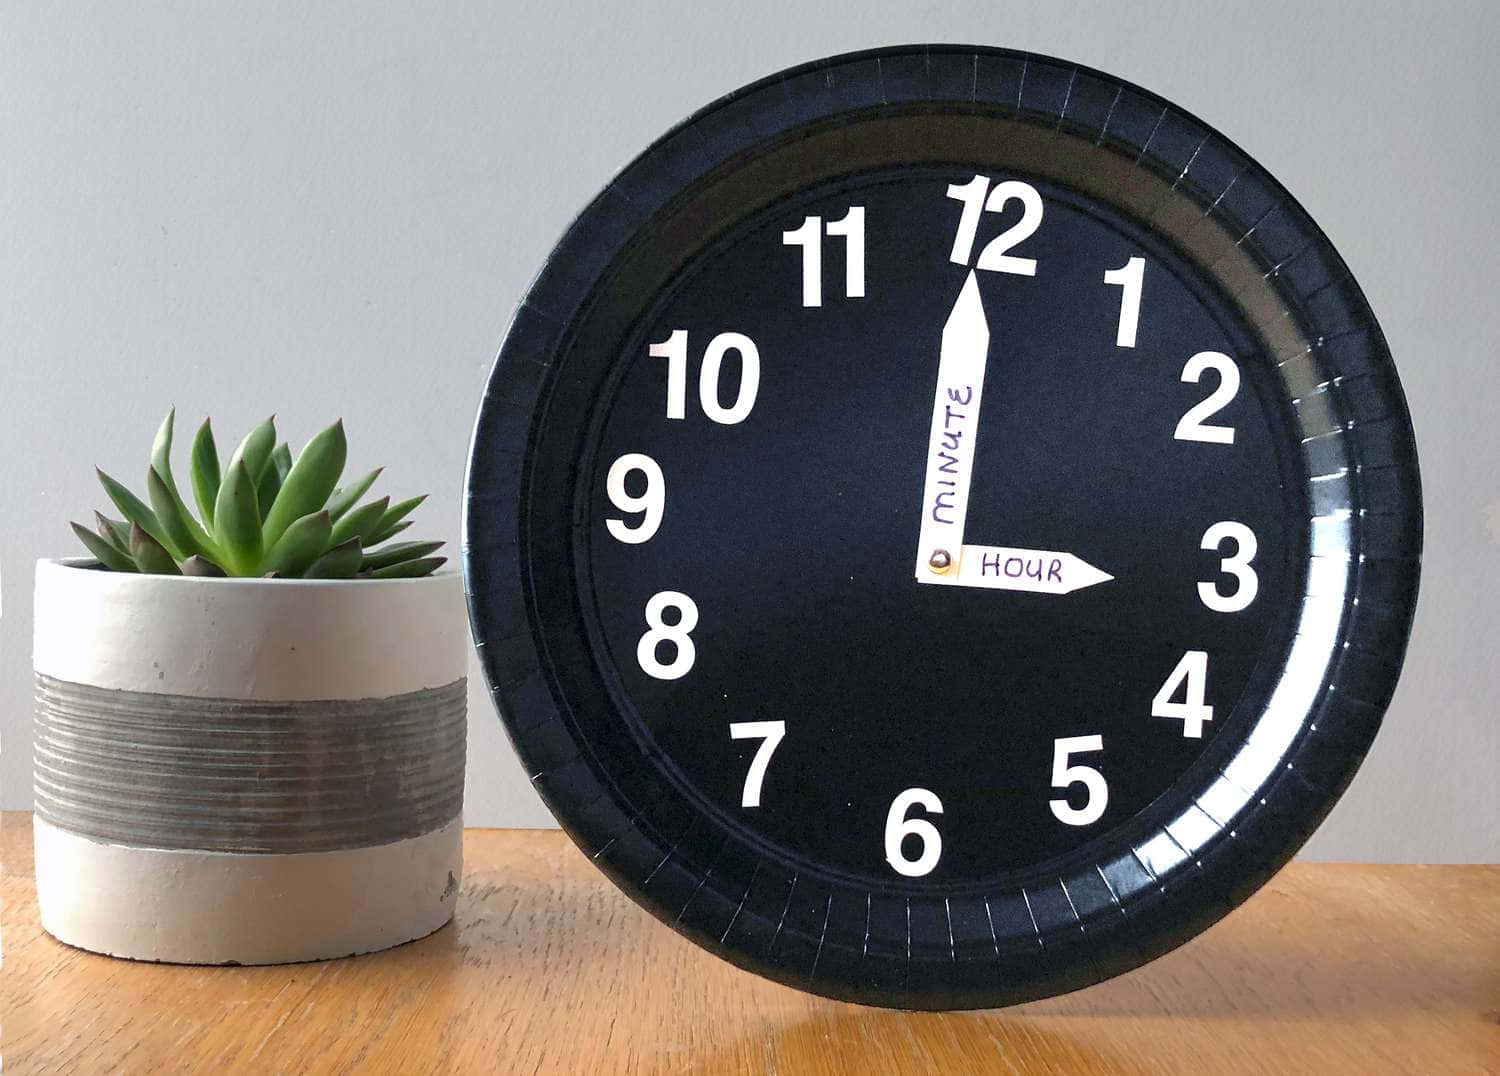 Make your day count with the classic design of this clock.